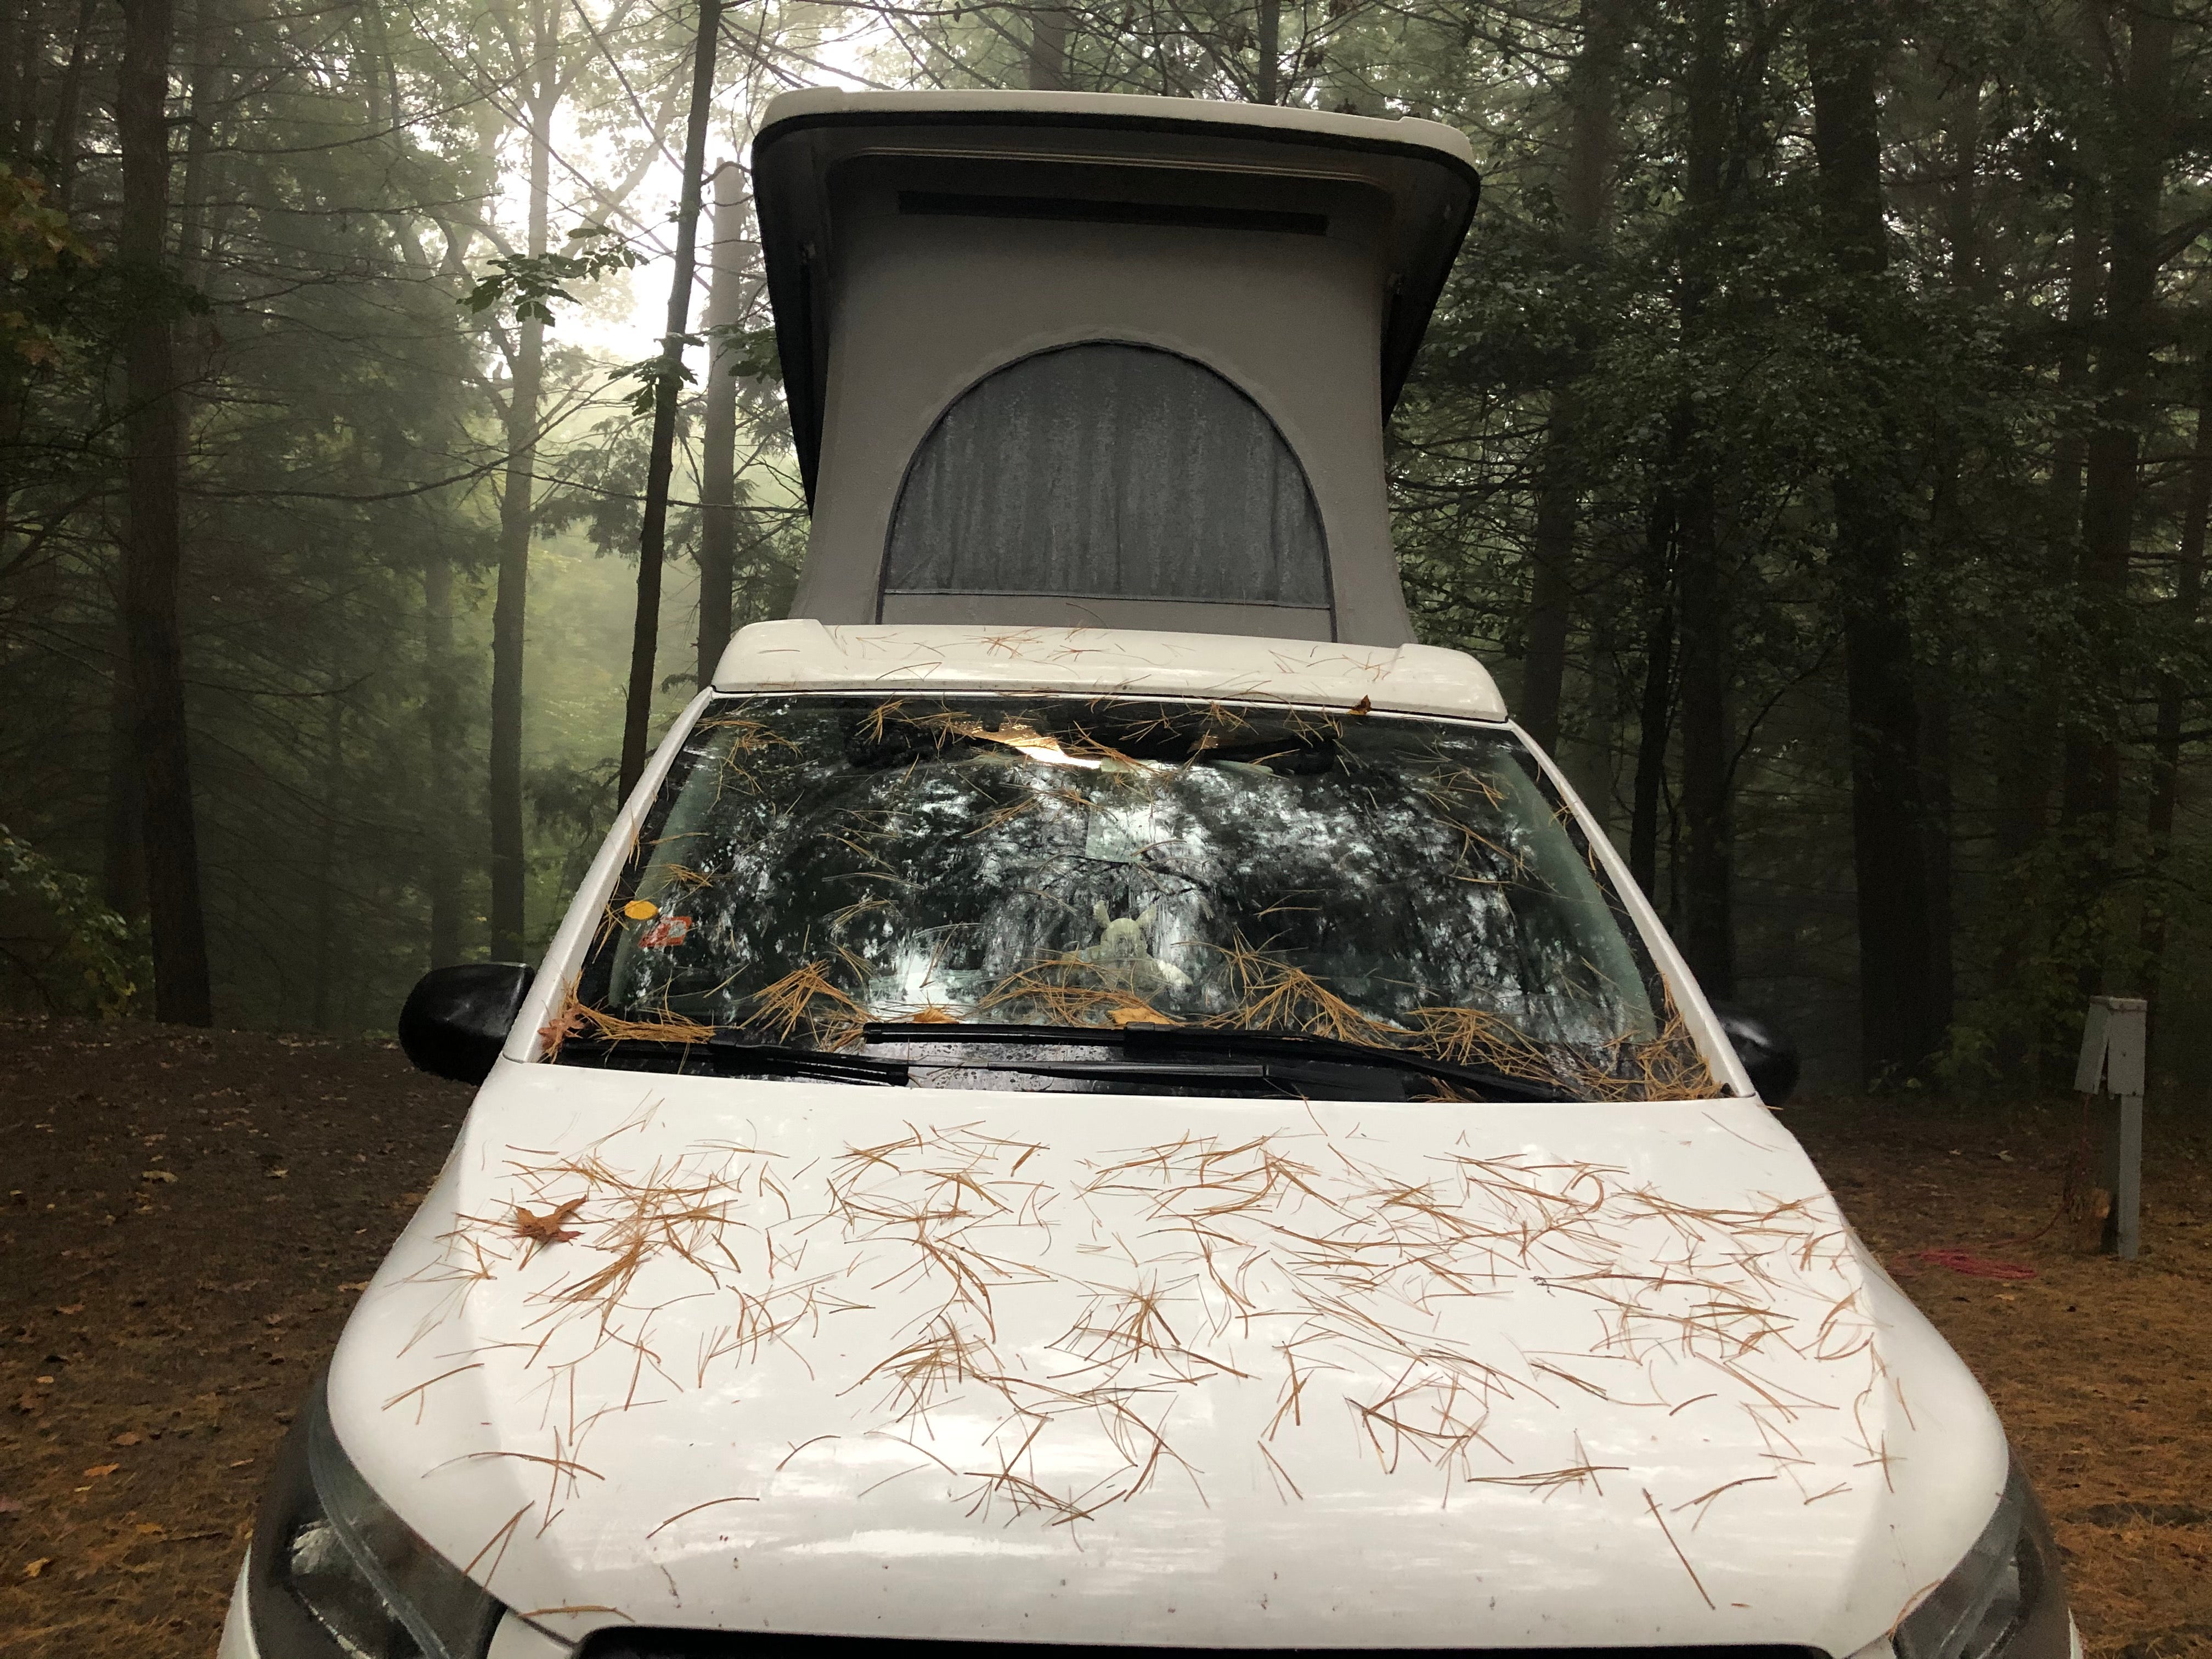 Our van after a night of rain!